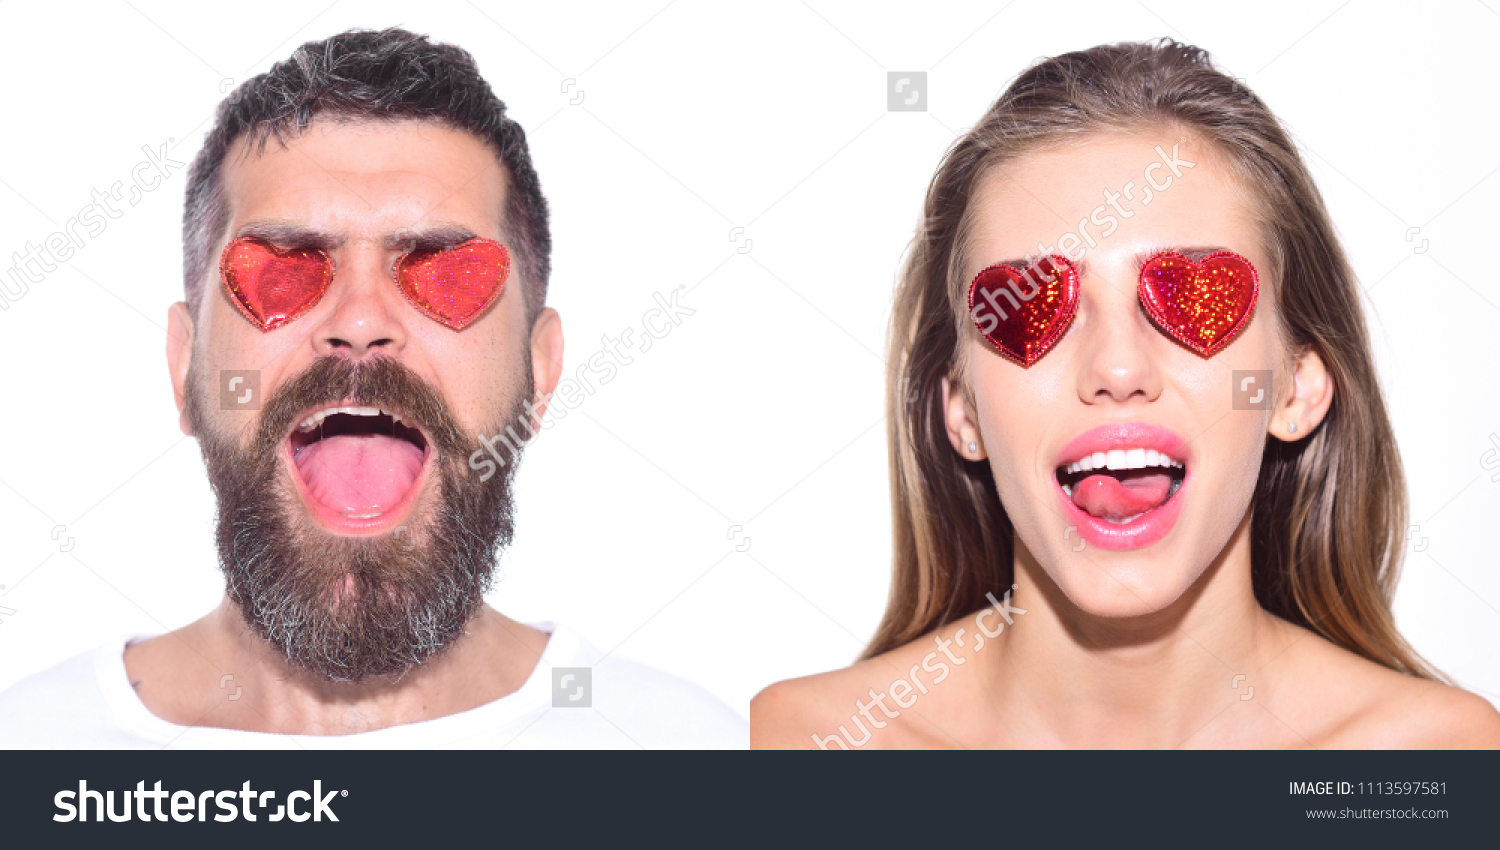 Emoji set of woman and bearded man with hearts on eyes. Collage of emotions. Different emotions. Feeling and emotions. Girl with hearts on eyes. Man with hearts on eyes. Face expression. Emoji set. #1113597581